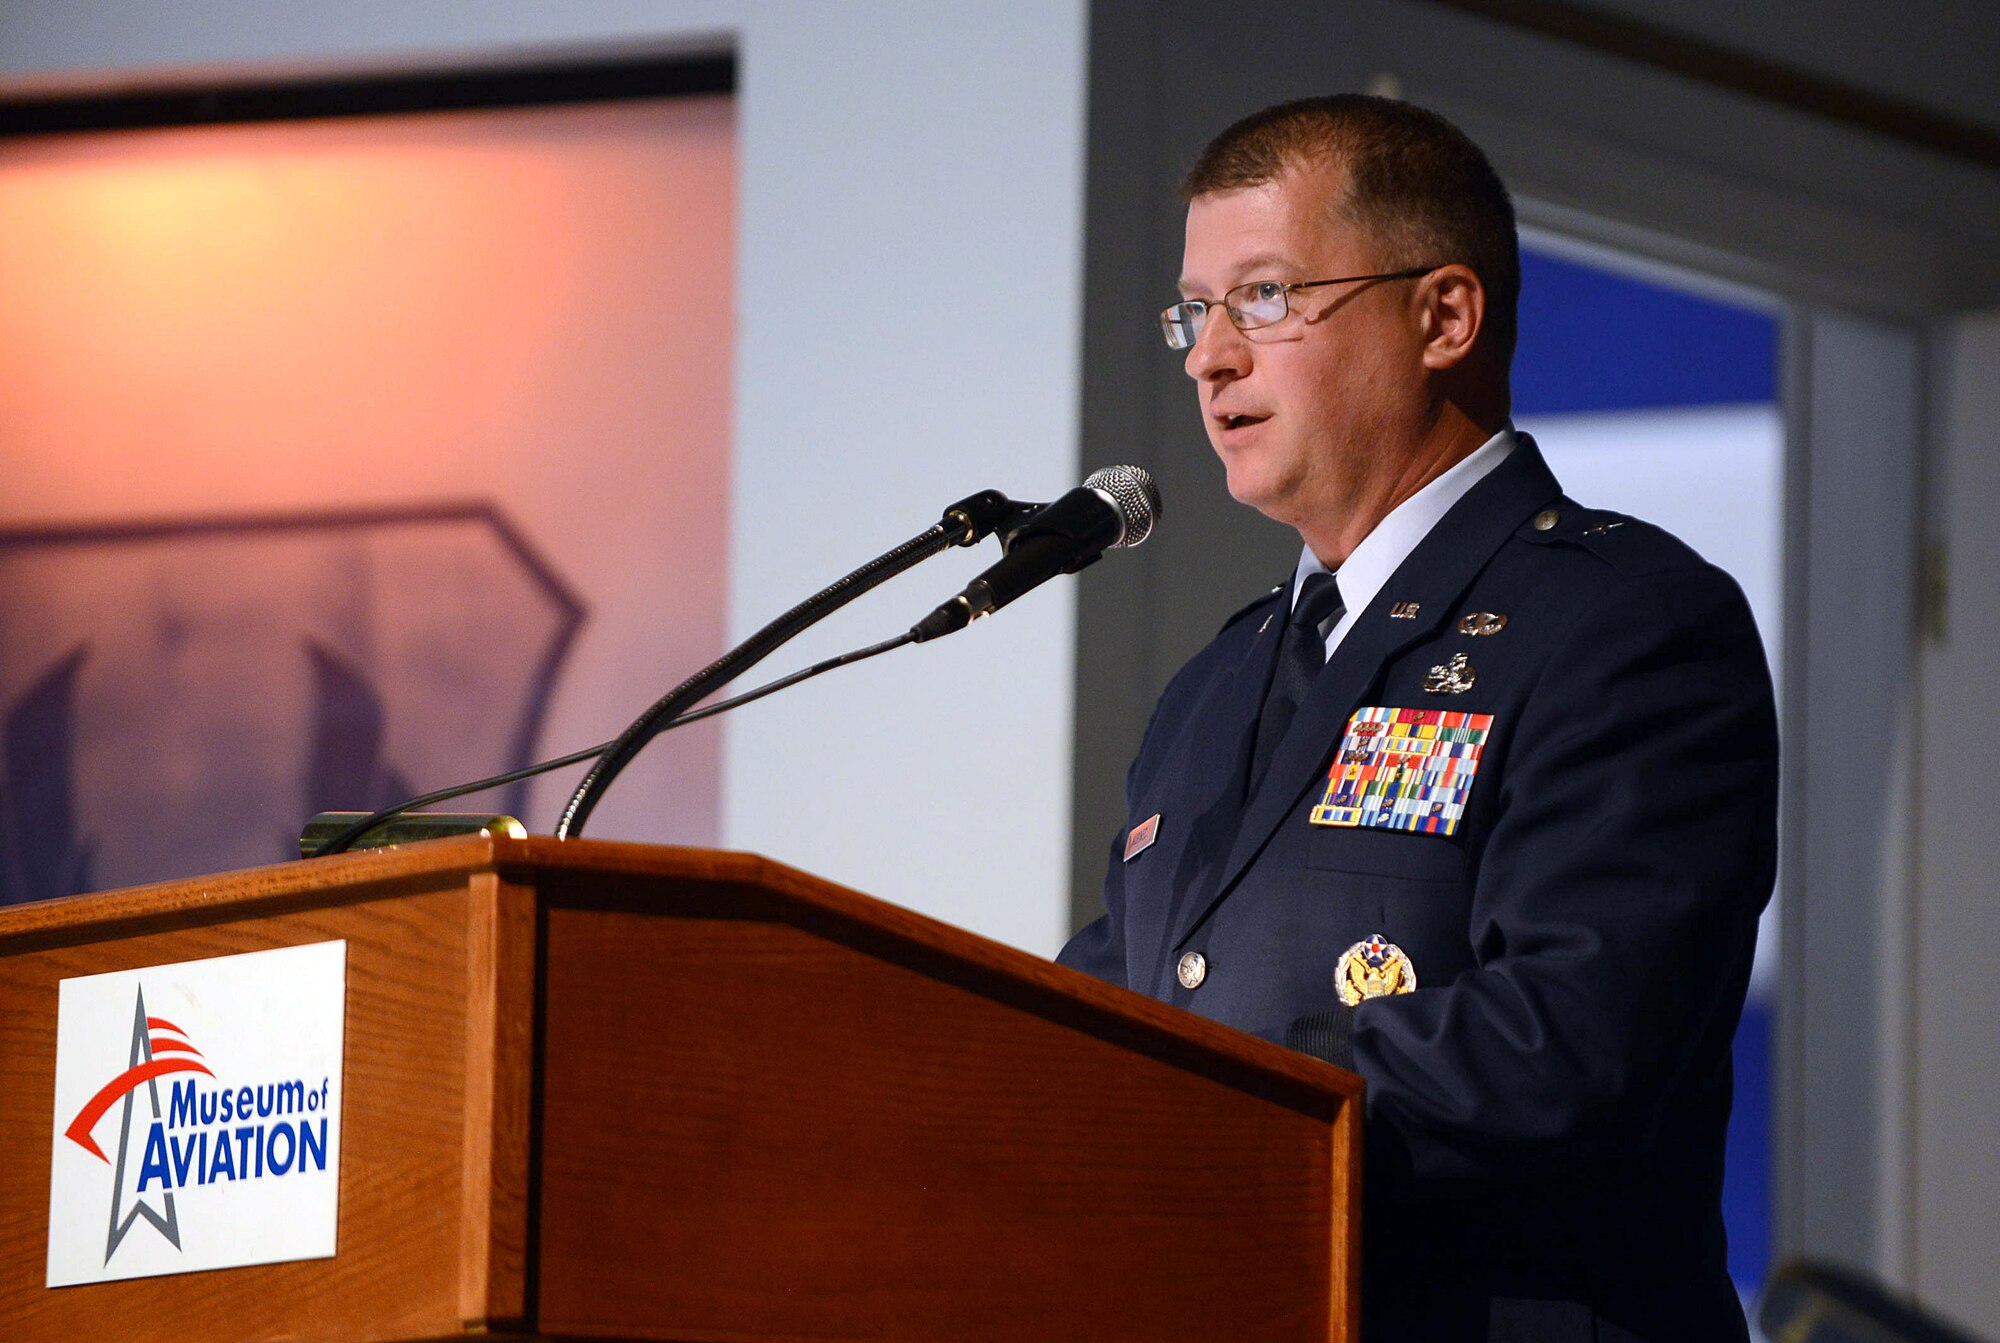 Brig. Gen. John Kubinec, addresses the audience after assuming command of the Warner Robins Air Logistics Complex, August 9, 2016, at the Museum of Aviation. (U.S. Air Force photo by Tommie Horton)